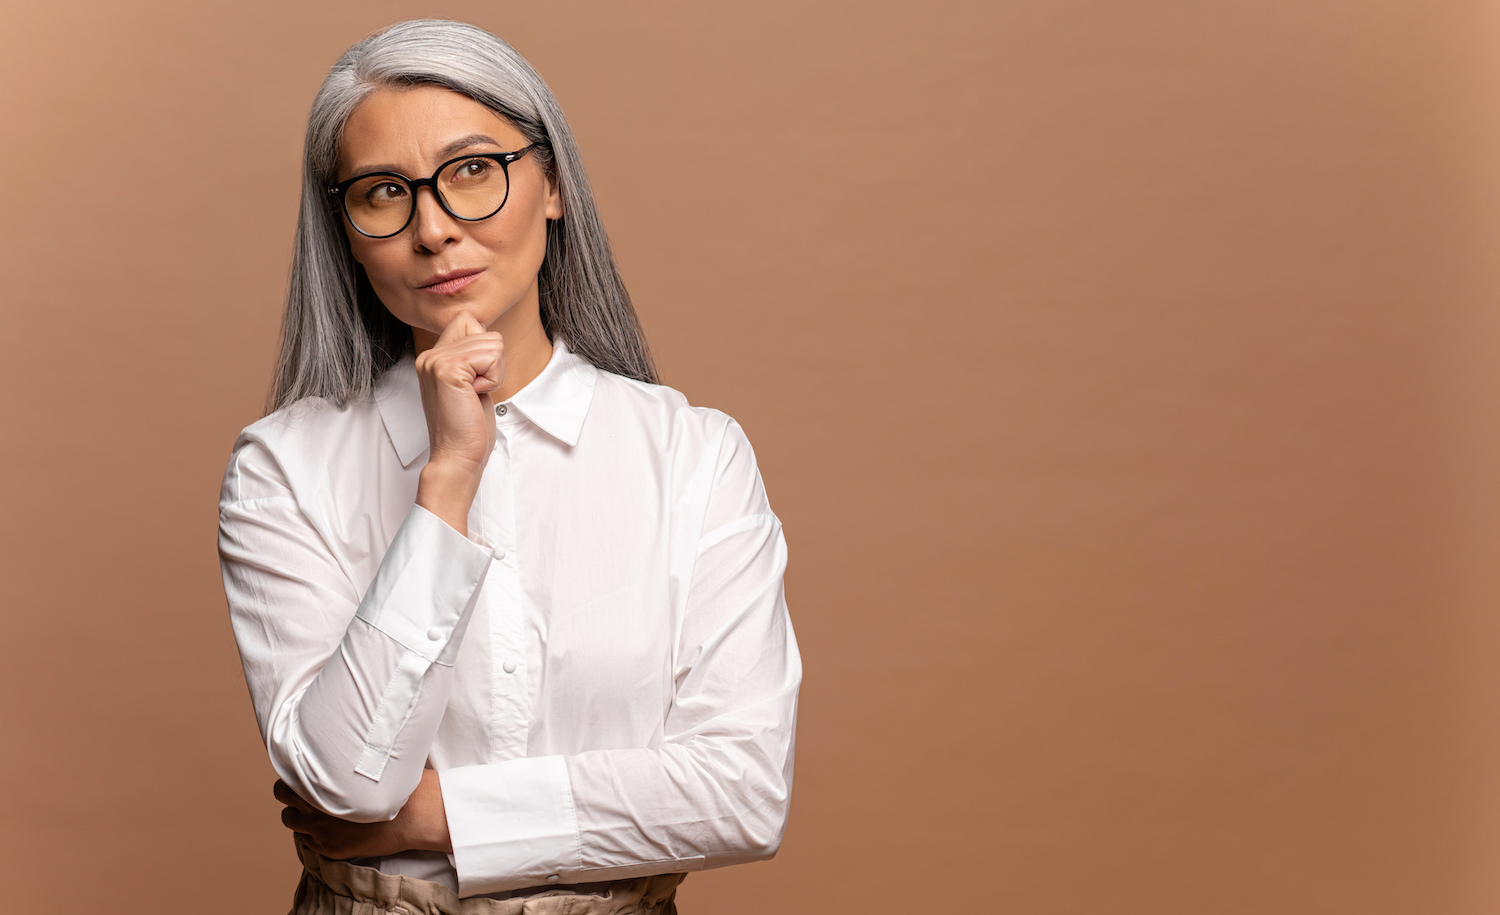 A woman looking thoughtfully to the side with the words, “Scientists Believe We Have More Than 5 Senses. What Does That Mean for Highly Sensitive People?”